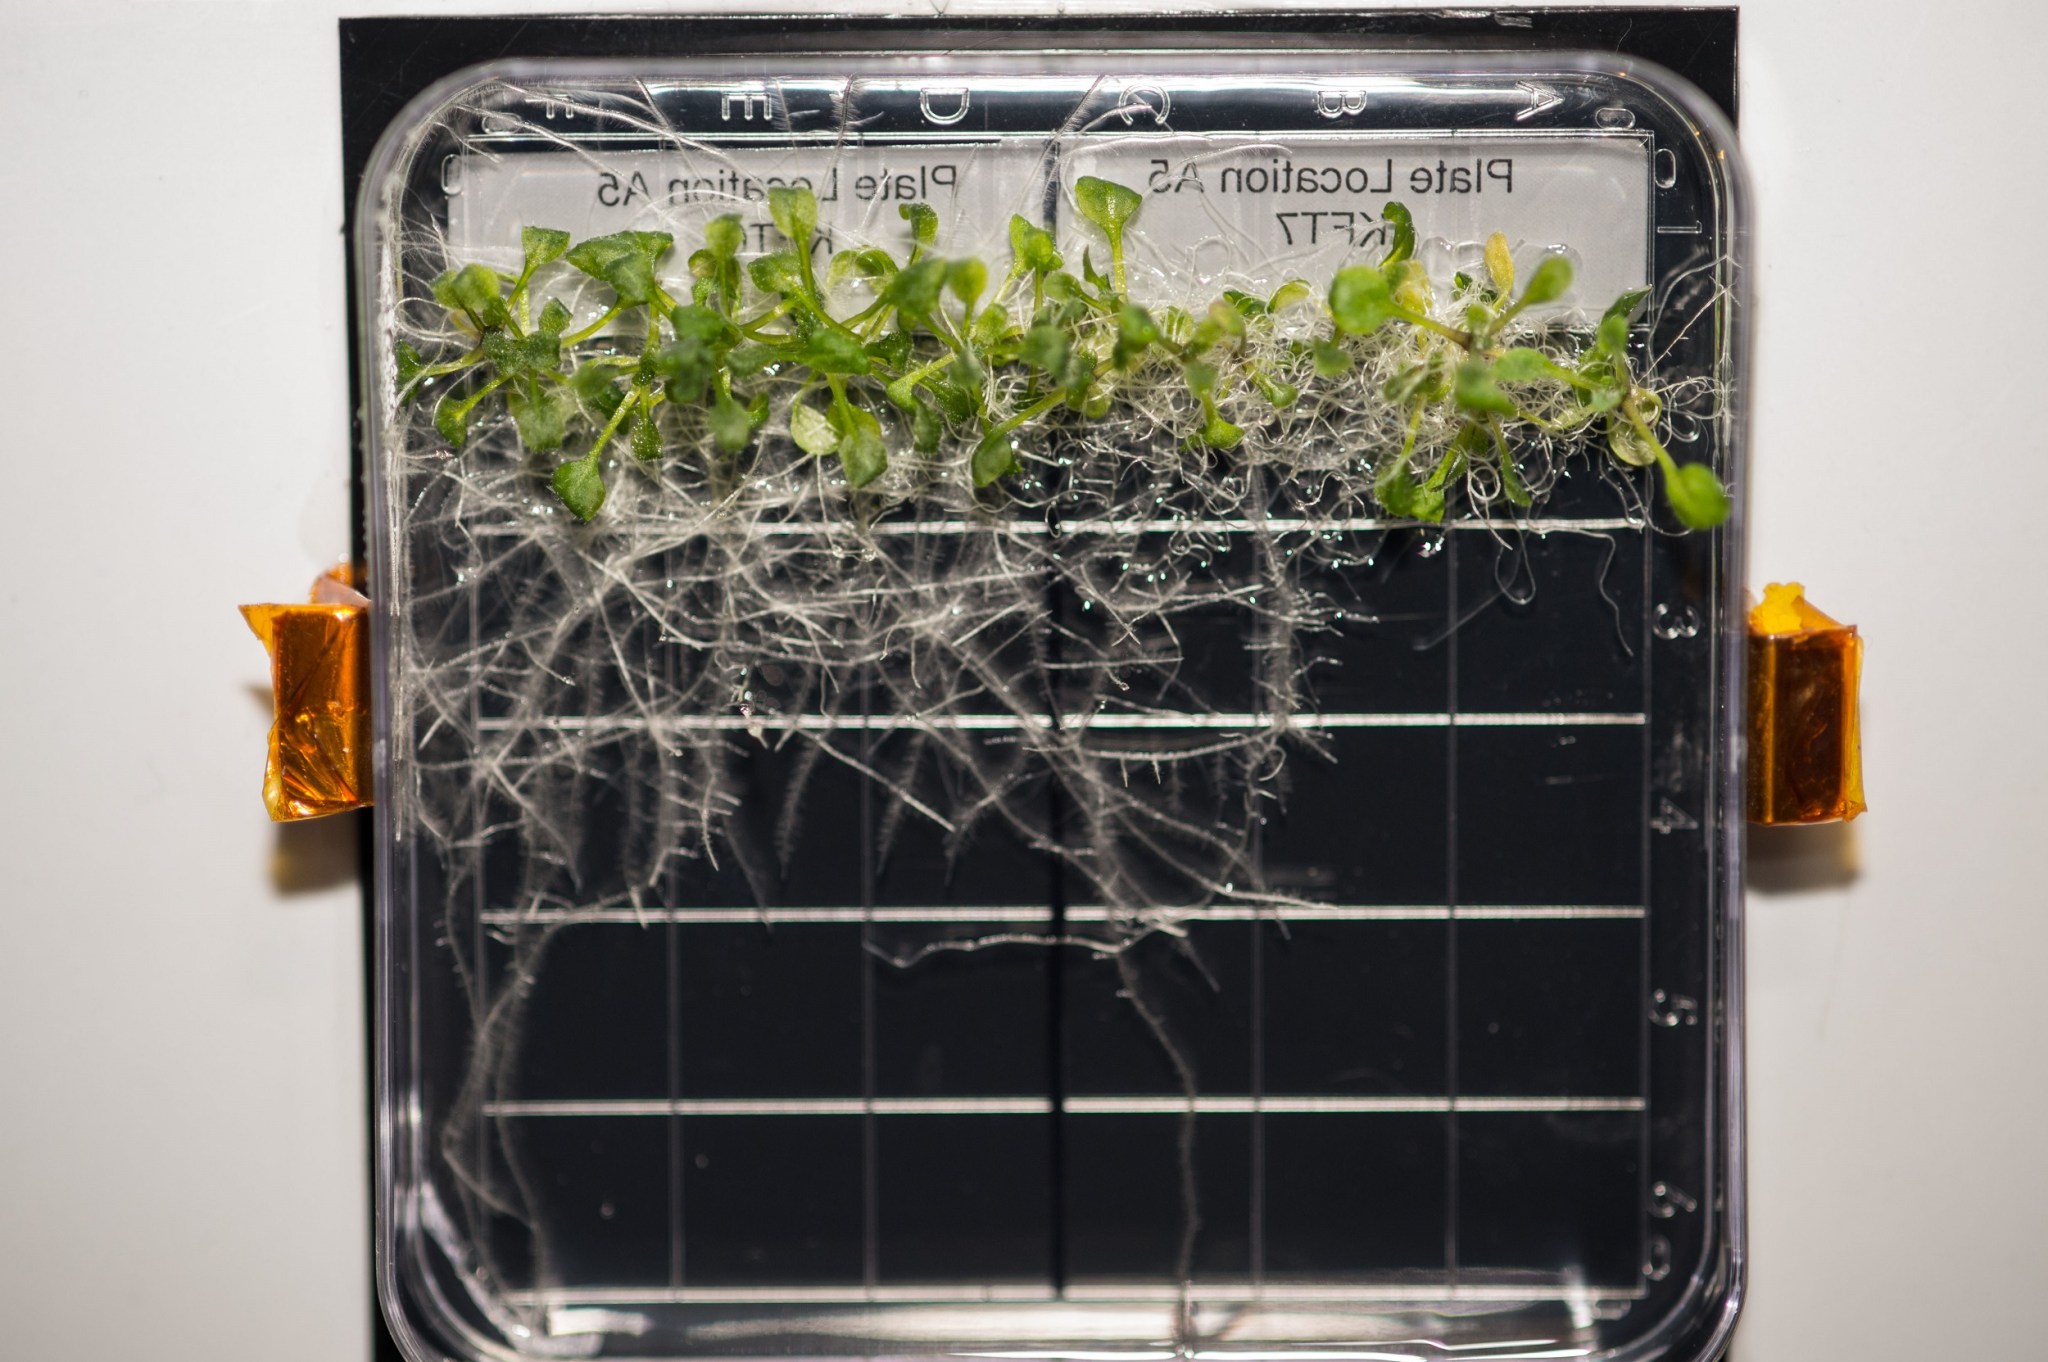 APEX-03 plates containing Arabidopsis thaliana plants. Credits: NASA Alt text: Plants with green leaves amid a tangle of white roots are visible inside a clear plastic box with an orange clip on each side. White labels can be seen through the box.